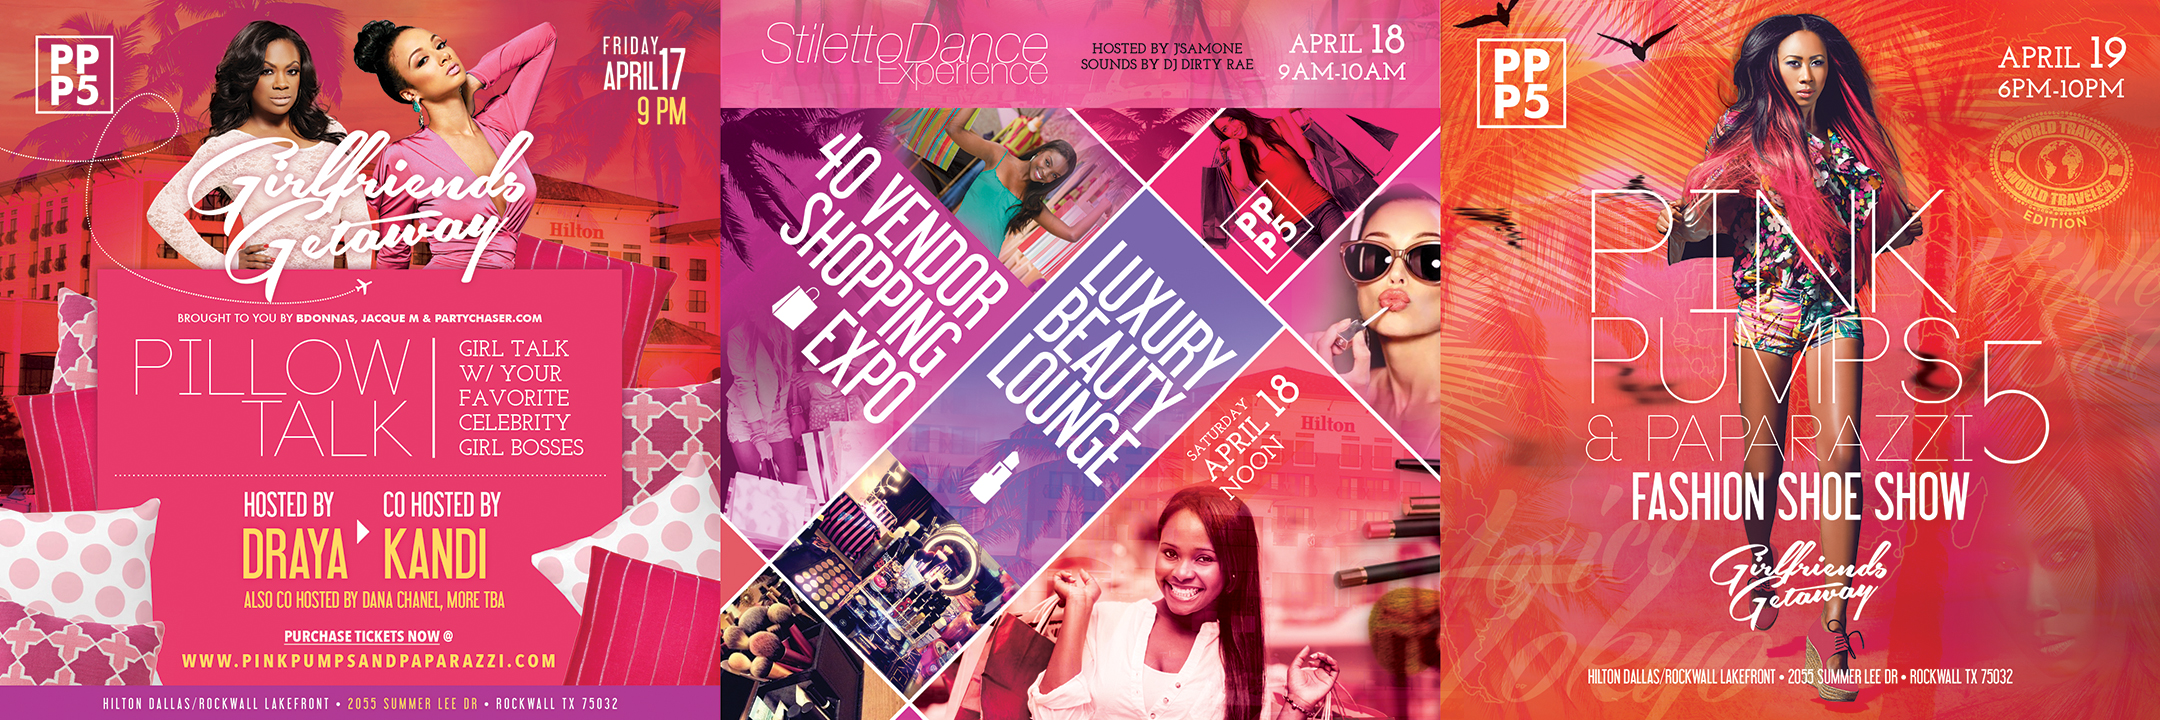 Enjoy cocktails and sound by DJ Duffey while also shopping the hottest designers & boutiques from across the country